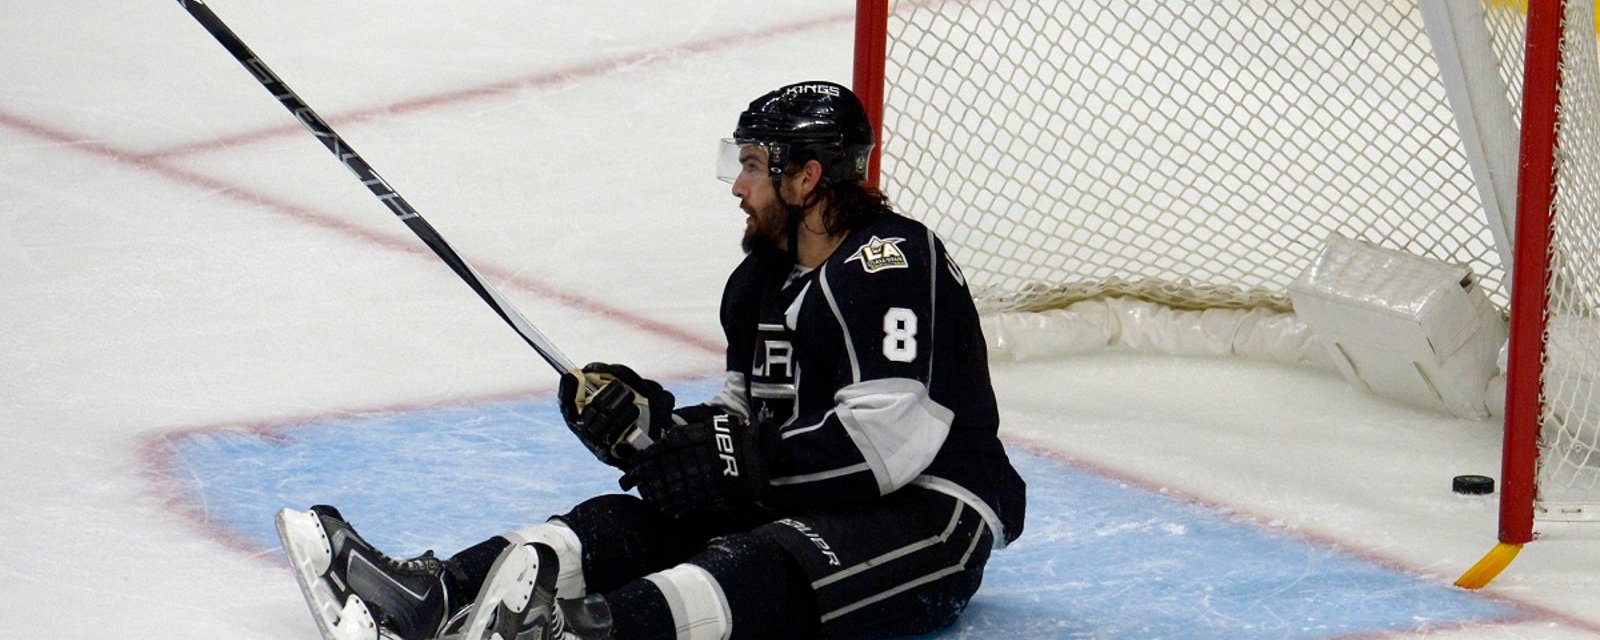 Breaking: Major accusations levied against NHL superstar Drew Doughty.